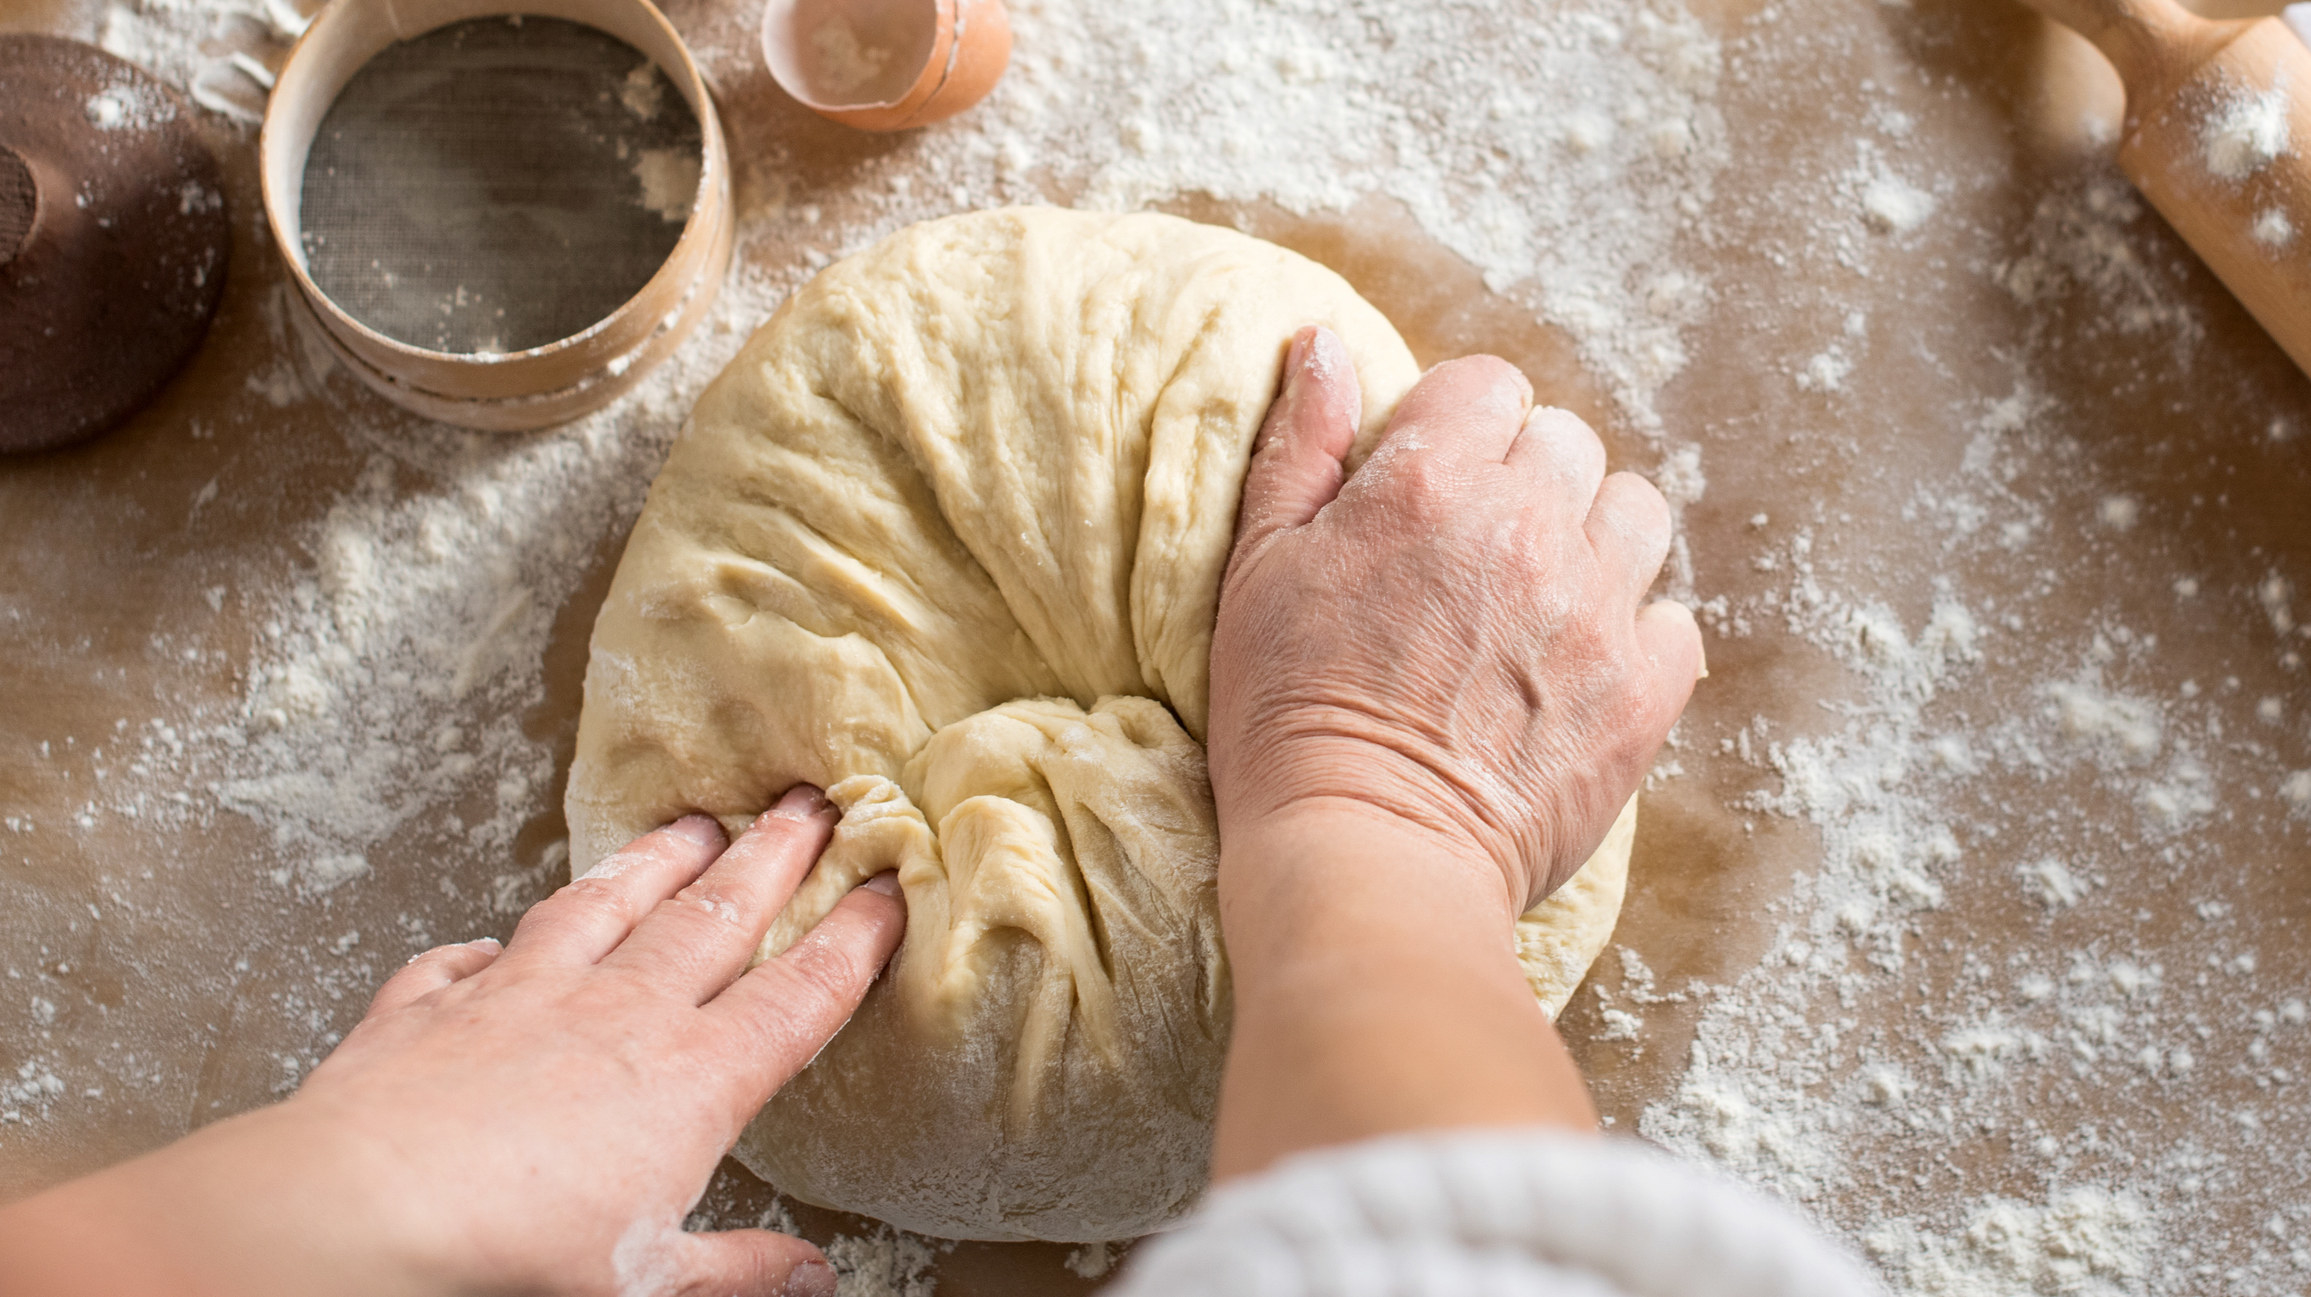 A person kneading pizza dough on a floured surface.